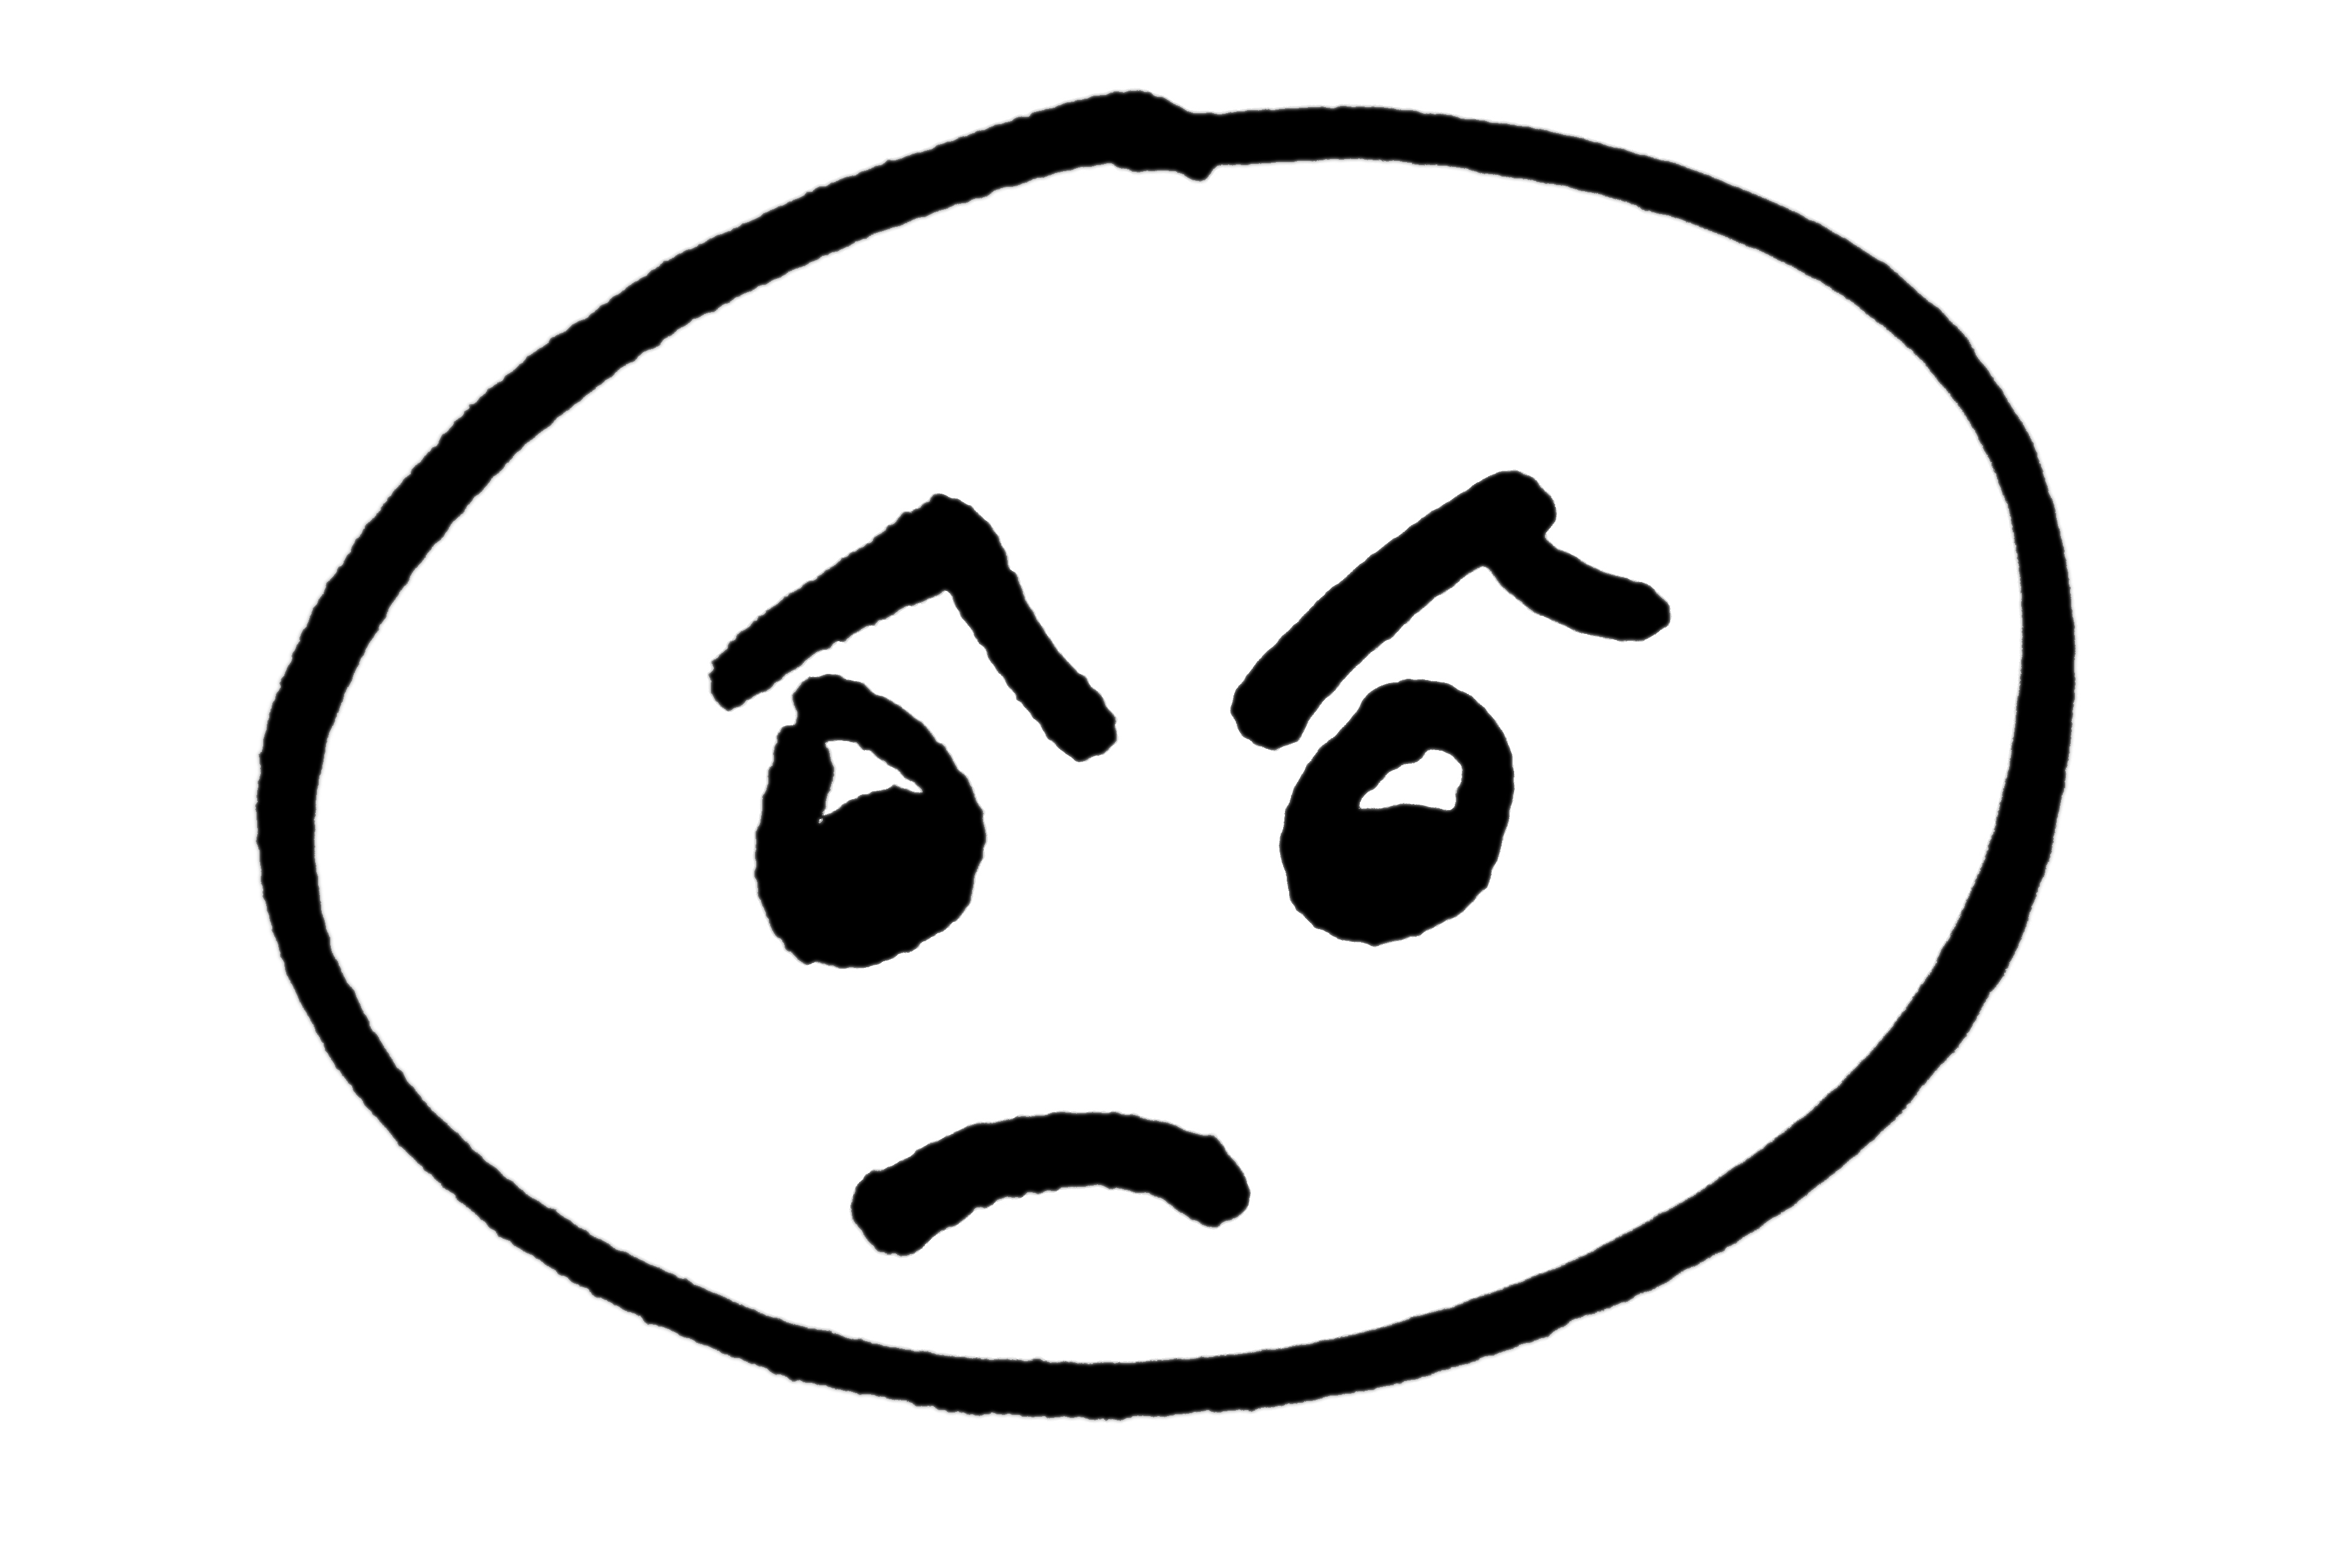 Mad face clipart clipart